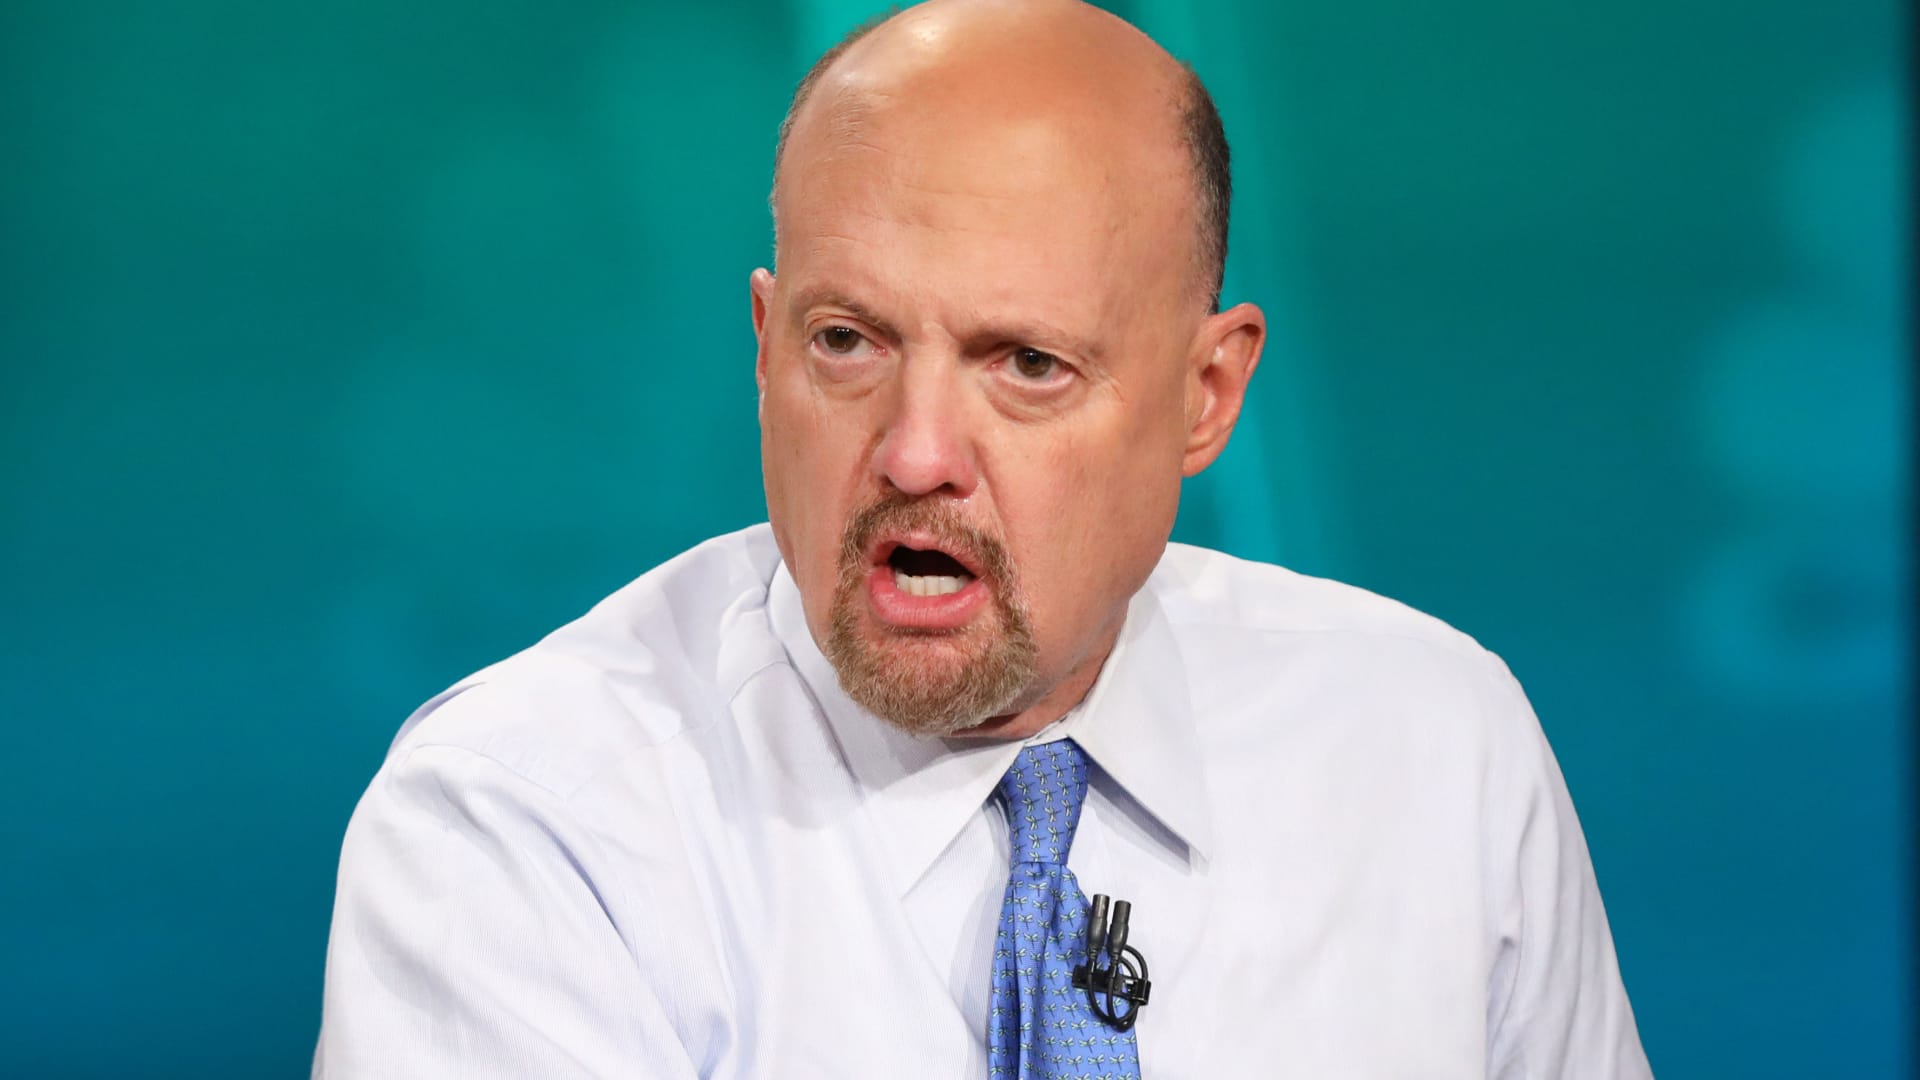 Stable particular person performers can buoy complete sectors, Jim Cramer says